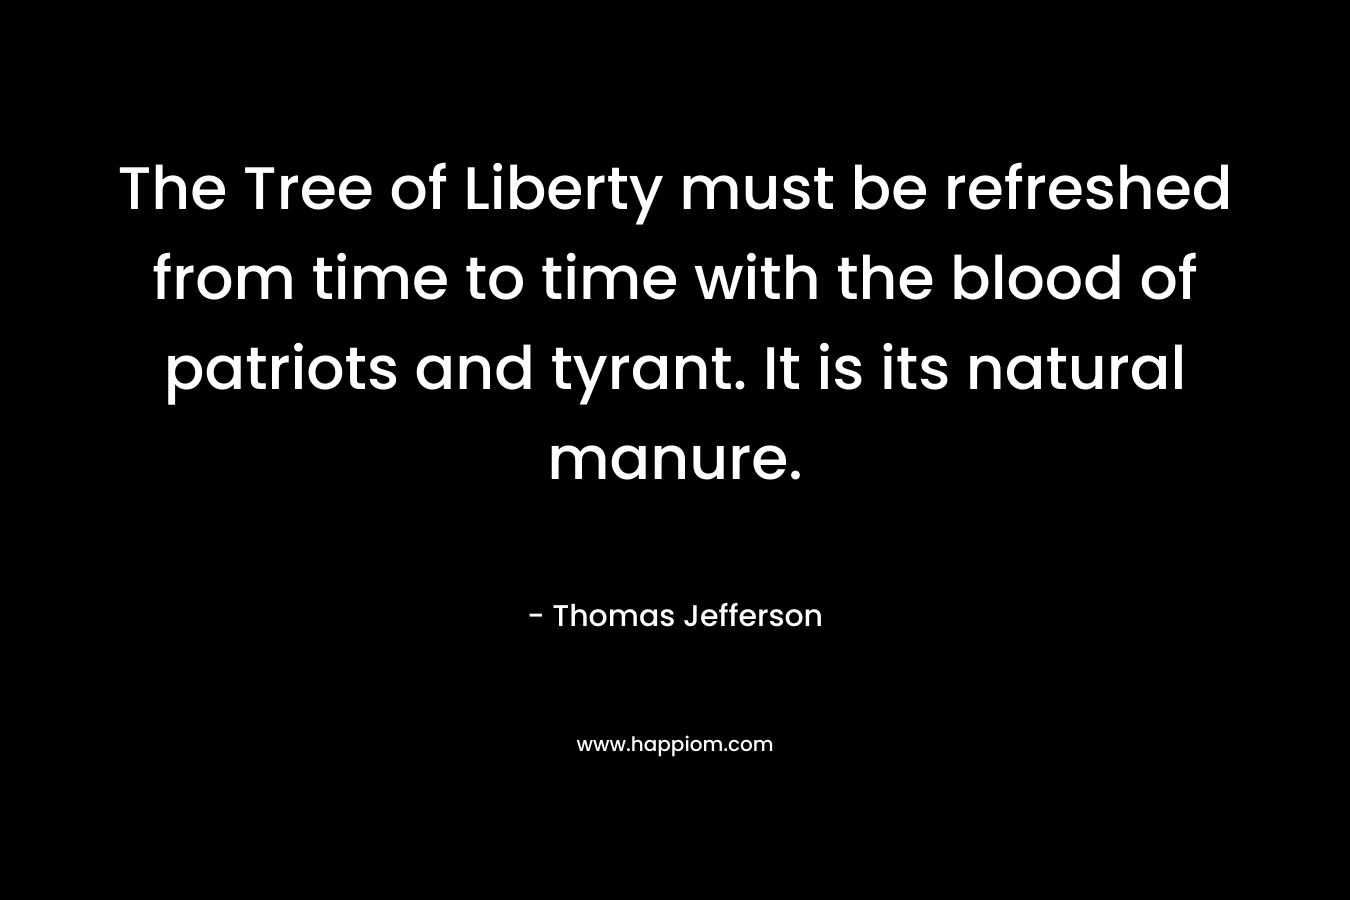 The Tree of Liberty must be refreshed from time to time with the blood of patriots and tyrant. It is its natural manure. – Thomas Jefferson